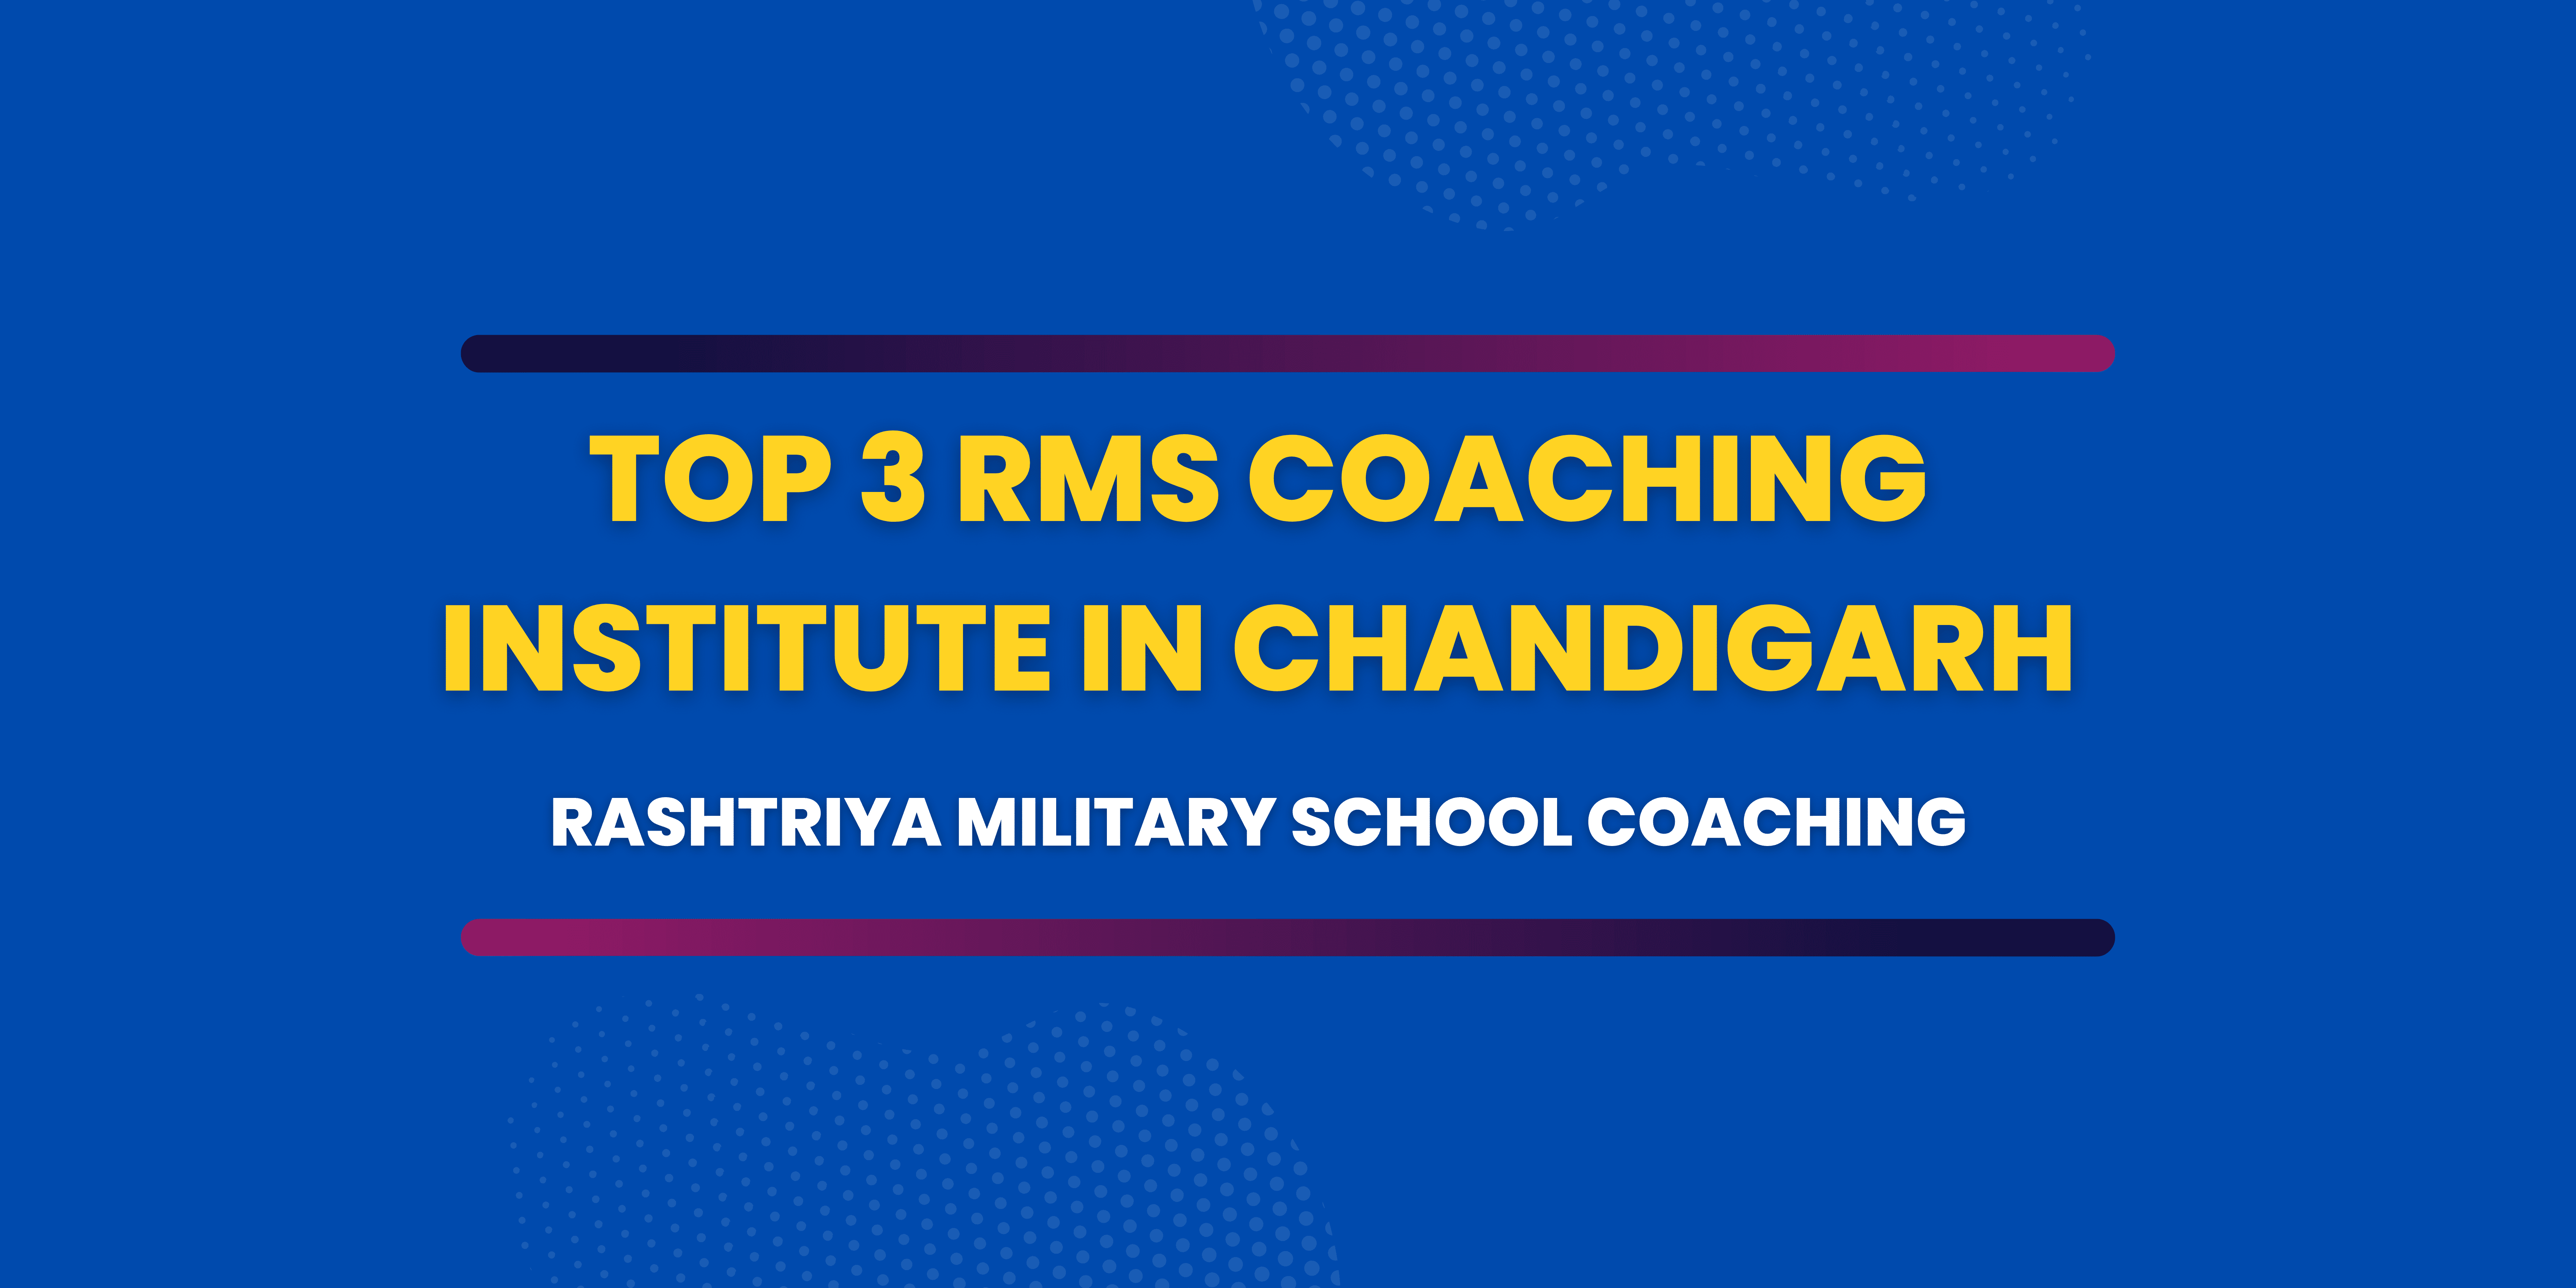 Top 3 RMS Coaching Institutes in Chandigarh - Digital Robin